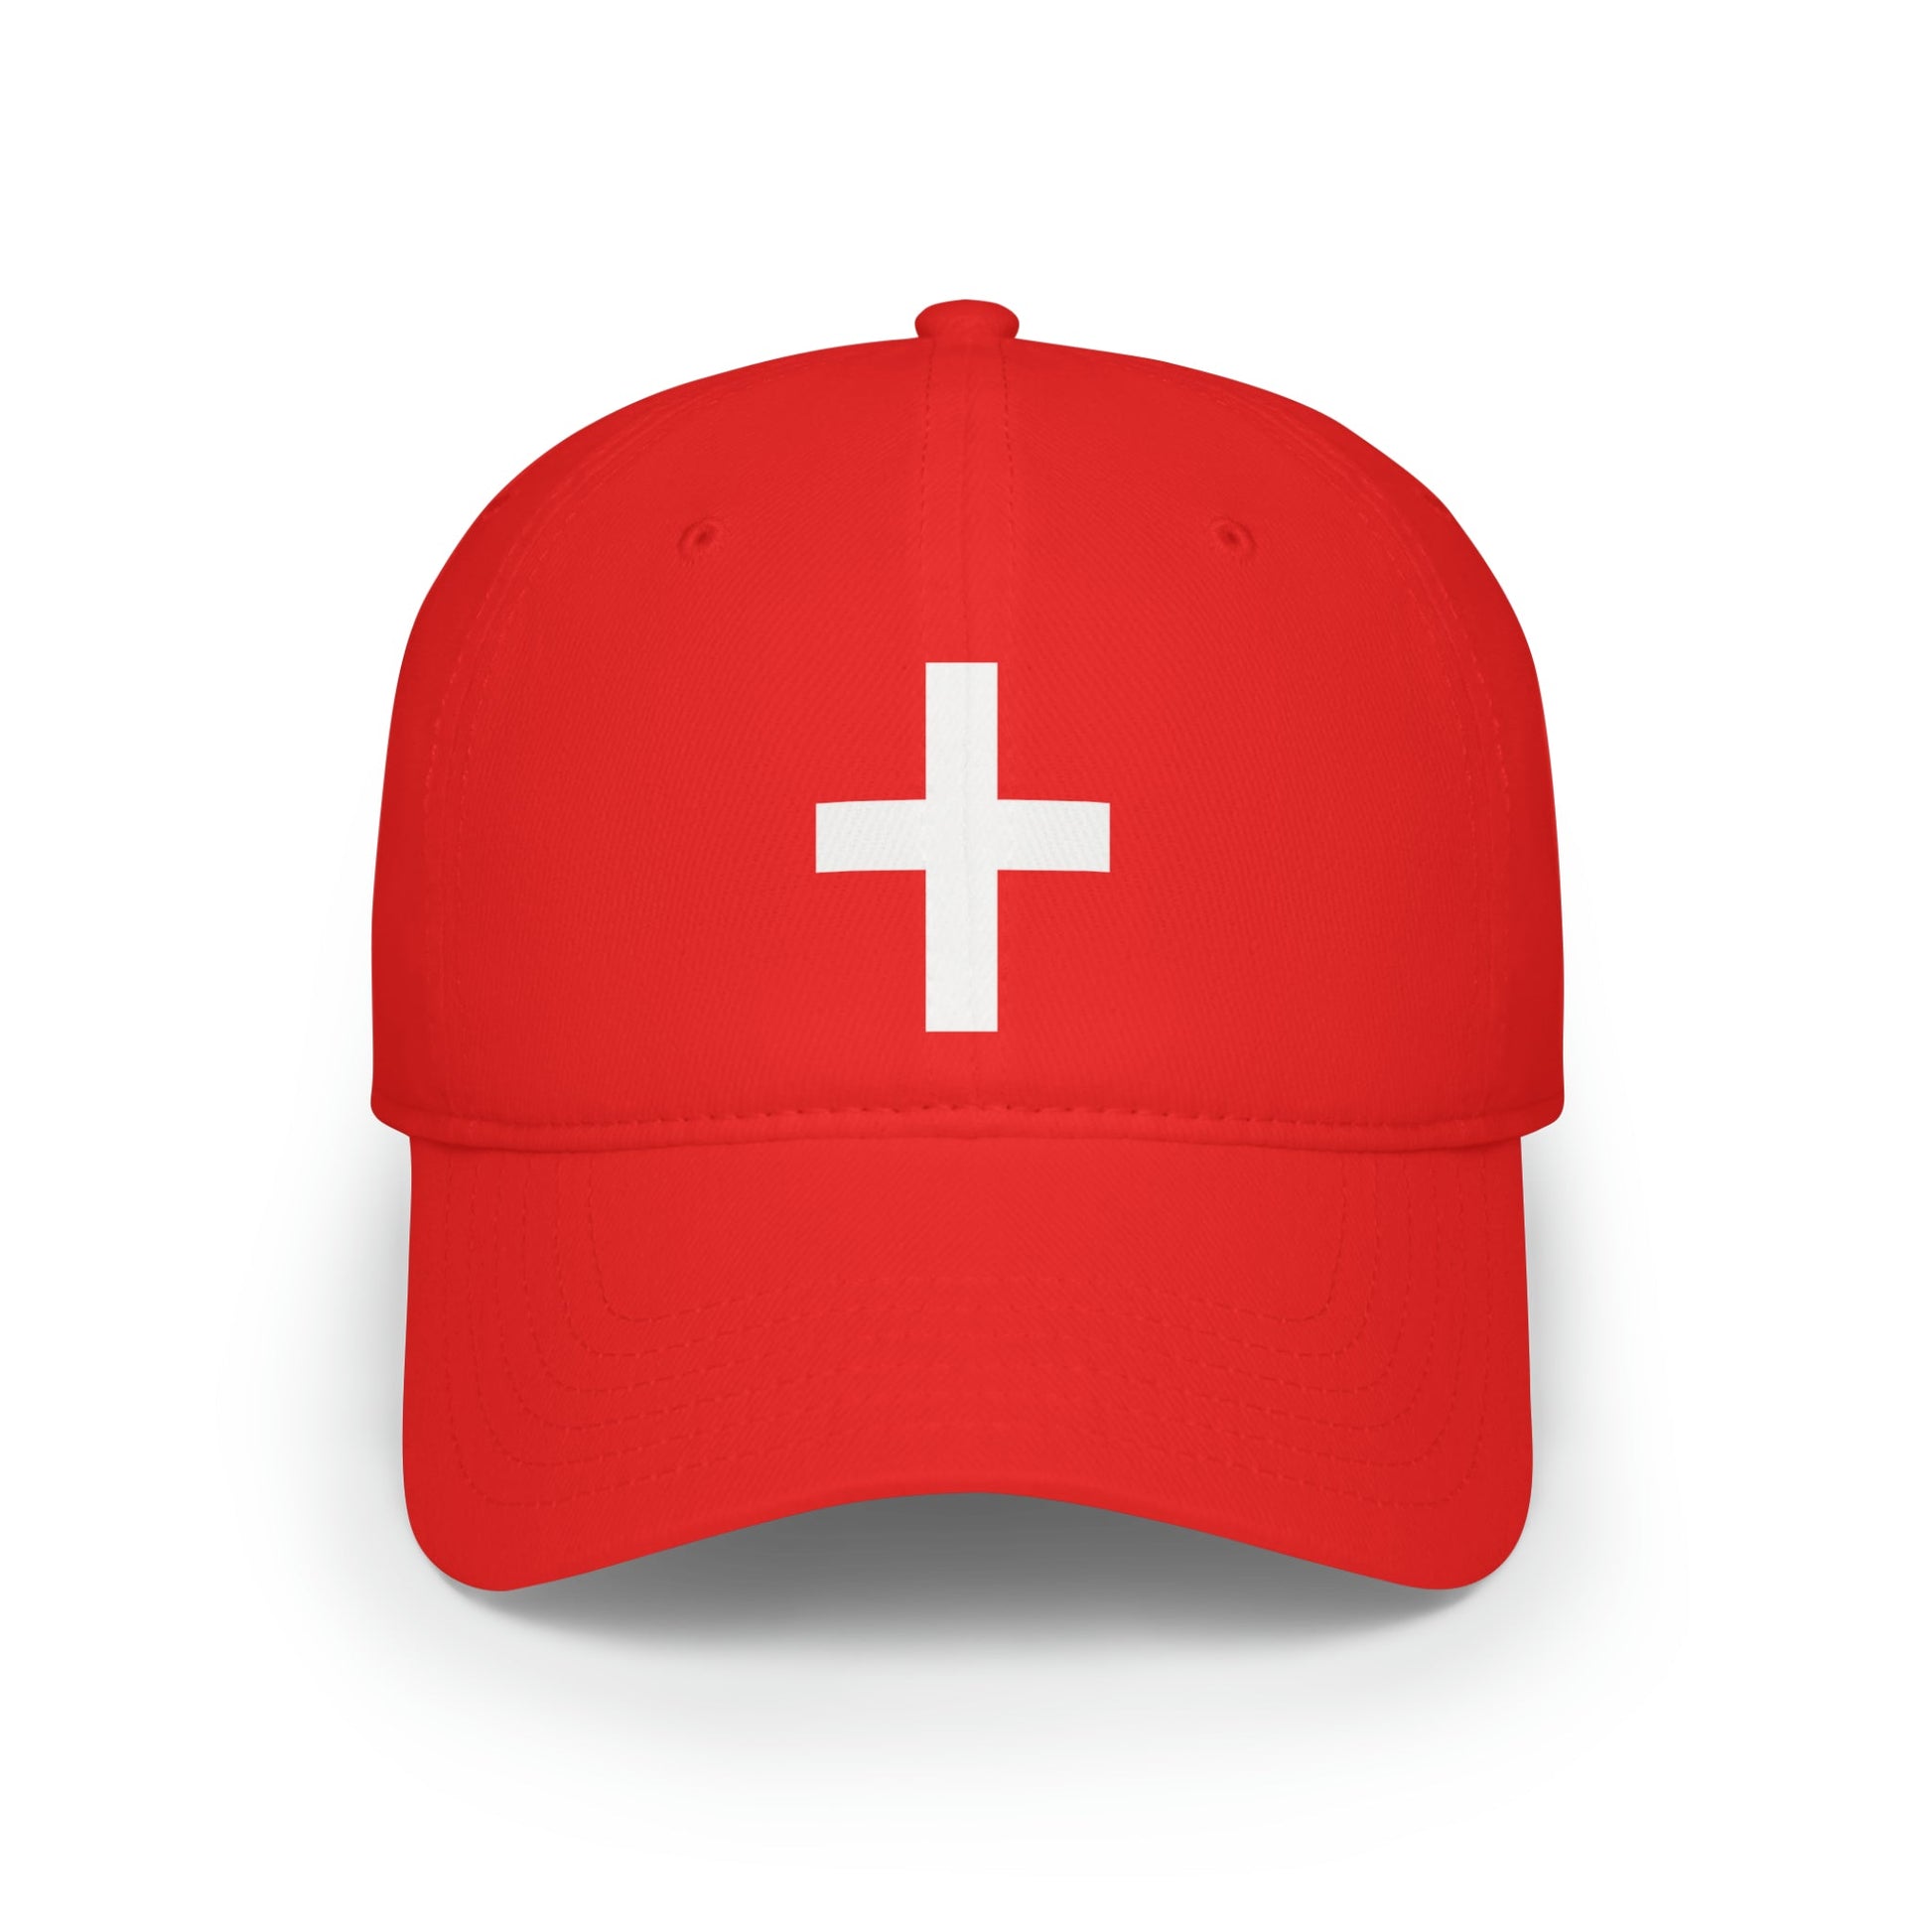 Righteous One Comes Signature Red Baseball Cap with White Cross - Jack Righteous